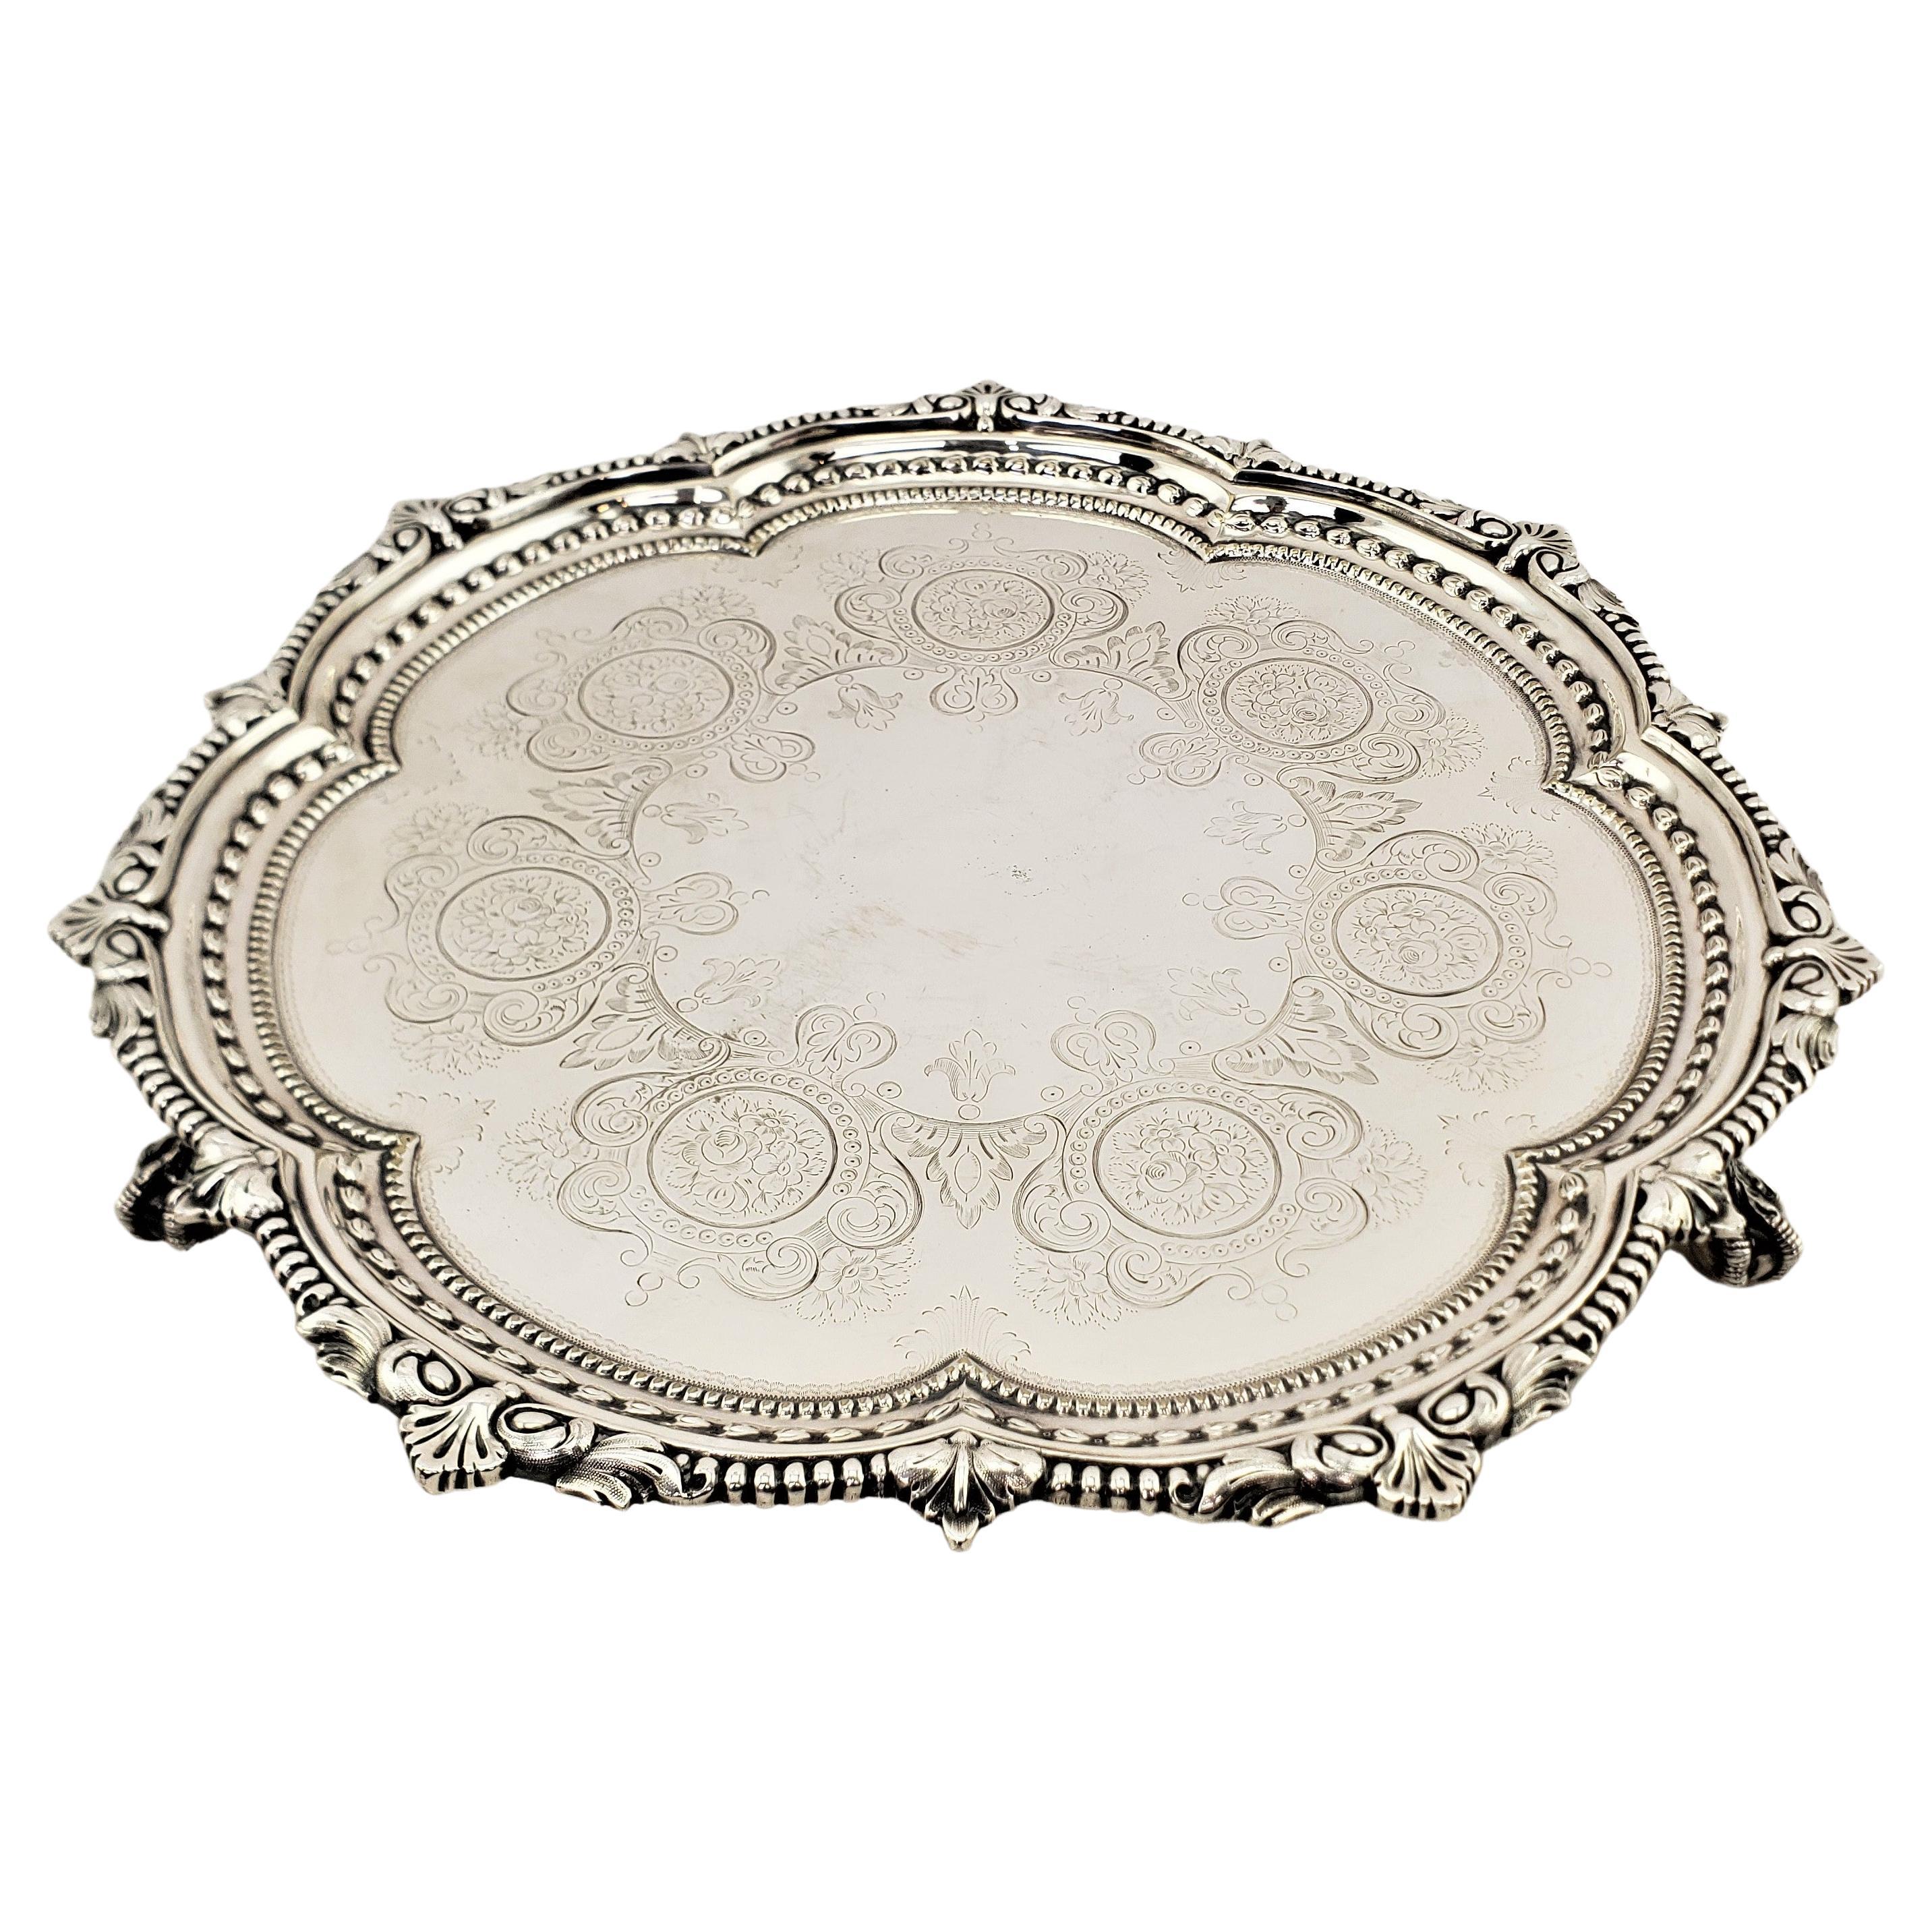 Antique English Silver Plated Serving Tray with Beaded Decoration & Claw Feet